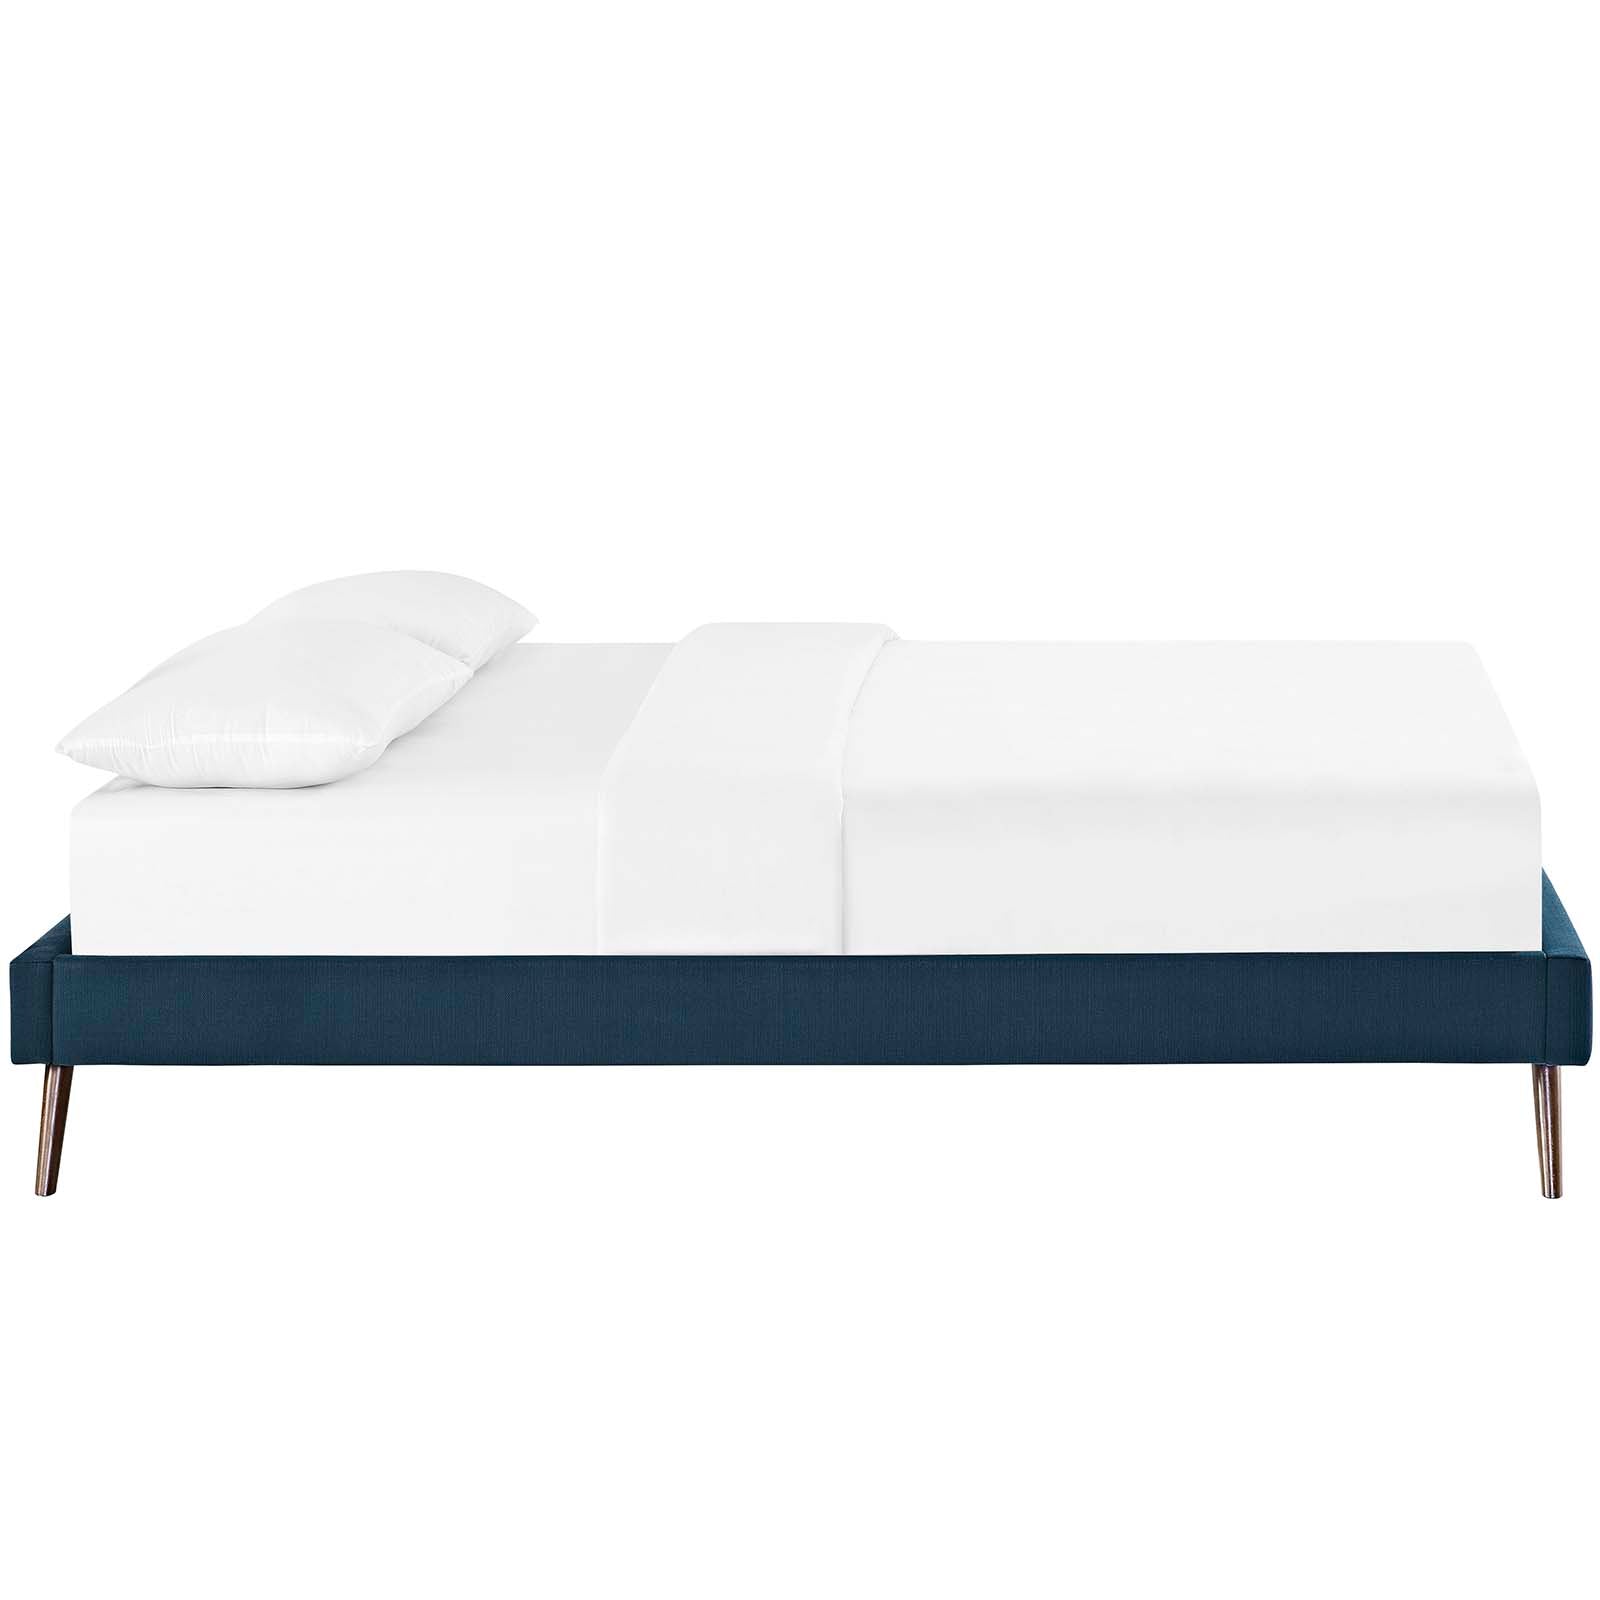 Modway Beds - Loryn Queen Fabric Bed Frame with Round Splayed Legs Azure